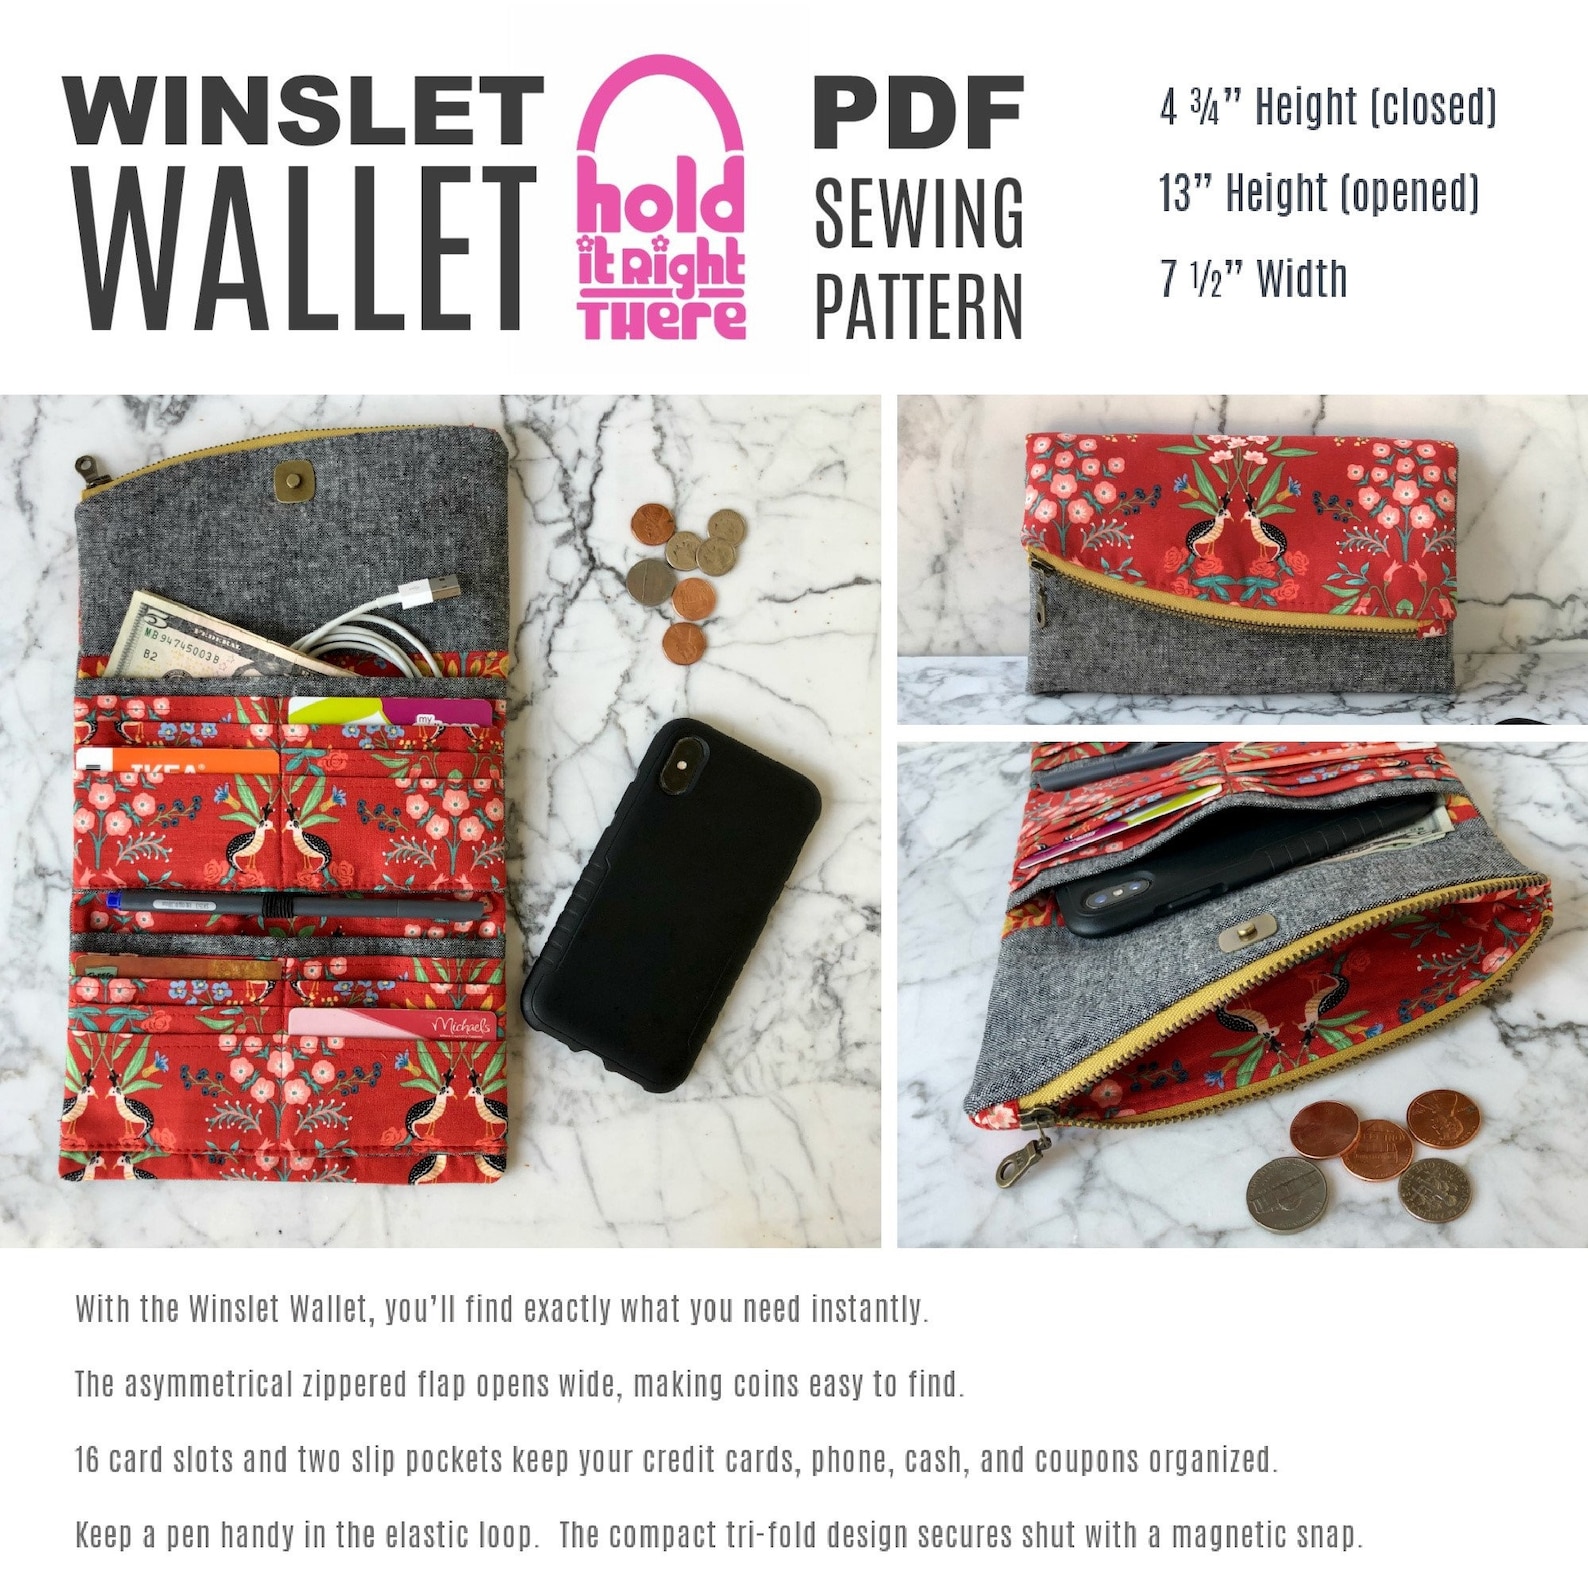 WINSLET WALLET PDF Sewing Pattern by Hold It Right There - Etsy Canada